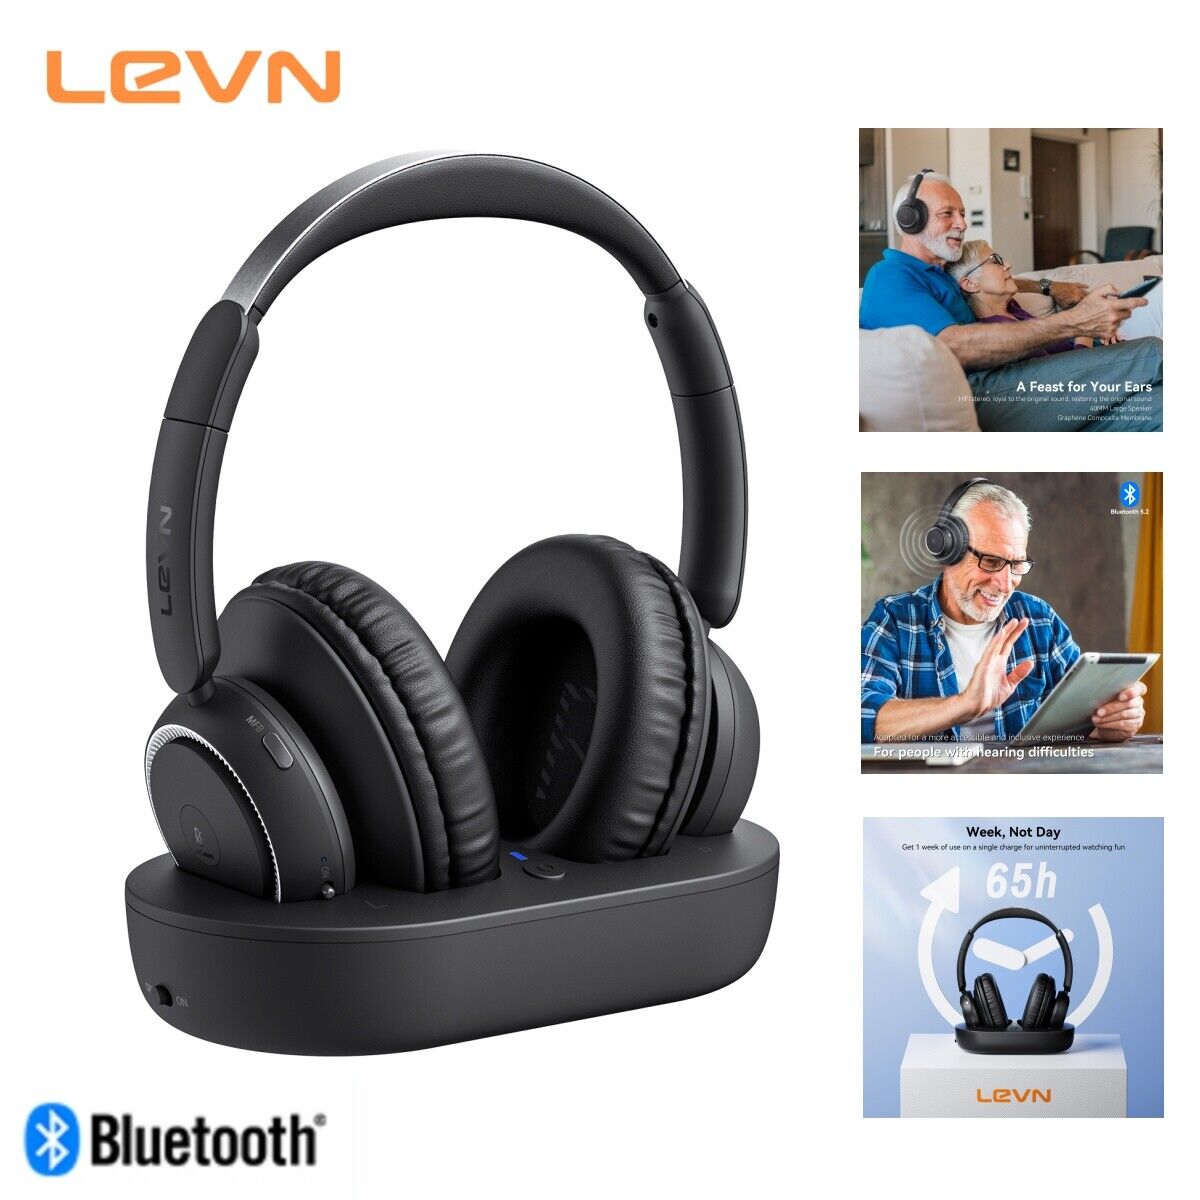 LEVN Bluetooth Wireless Headphones For TV, With TV Transmitter Charging Base